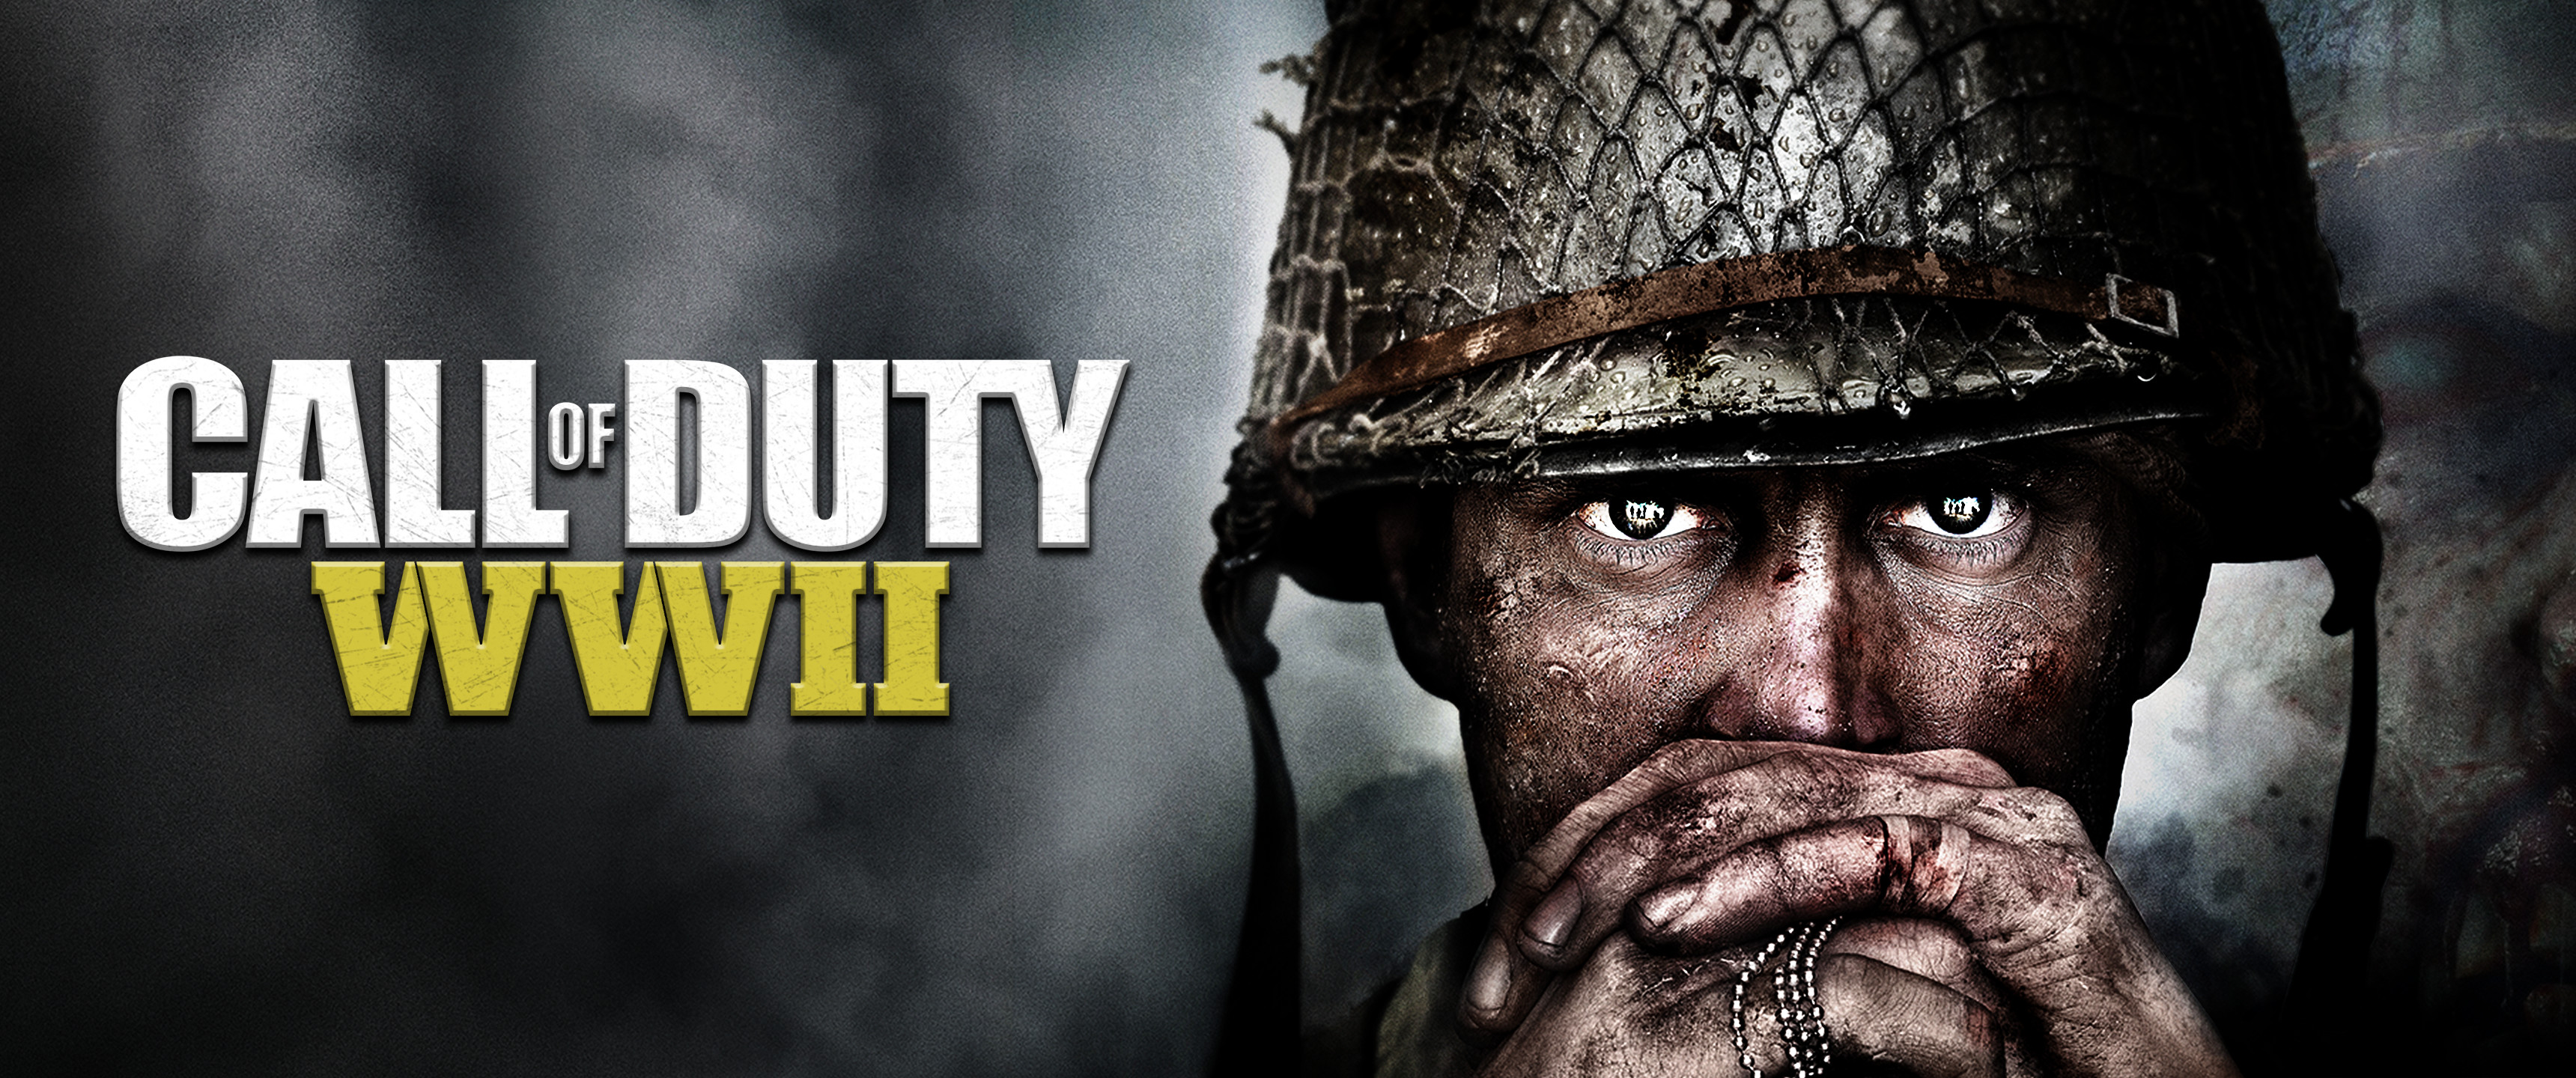 3440x1440 Image21:9 Call Of Duty: WWII Wallpaper ...